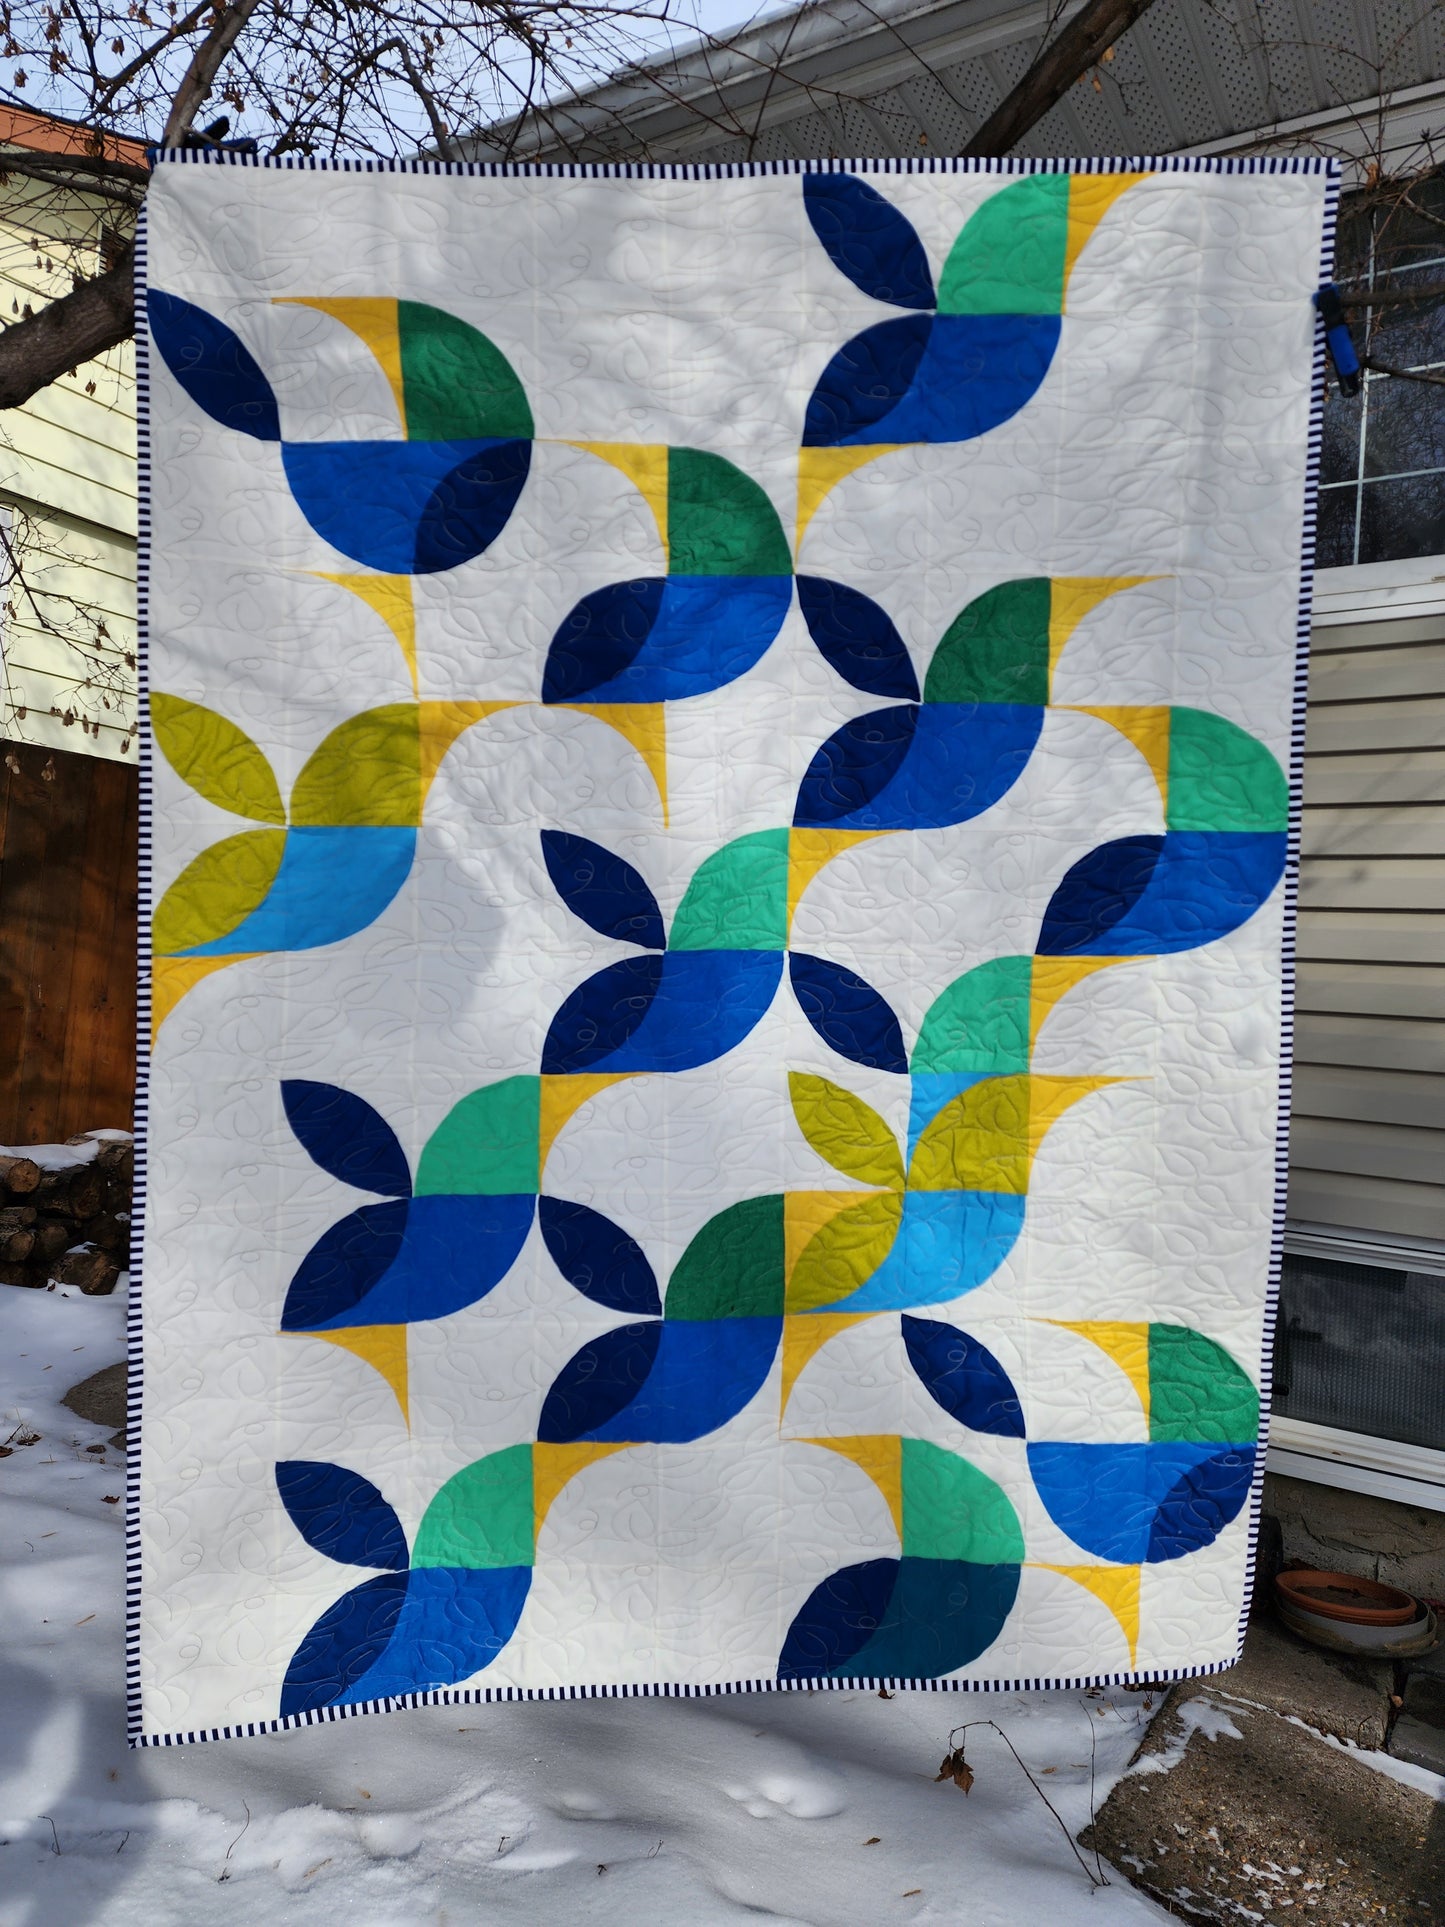 Birds of a Feather Quilt Pattern - Physical Copy